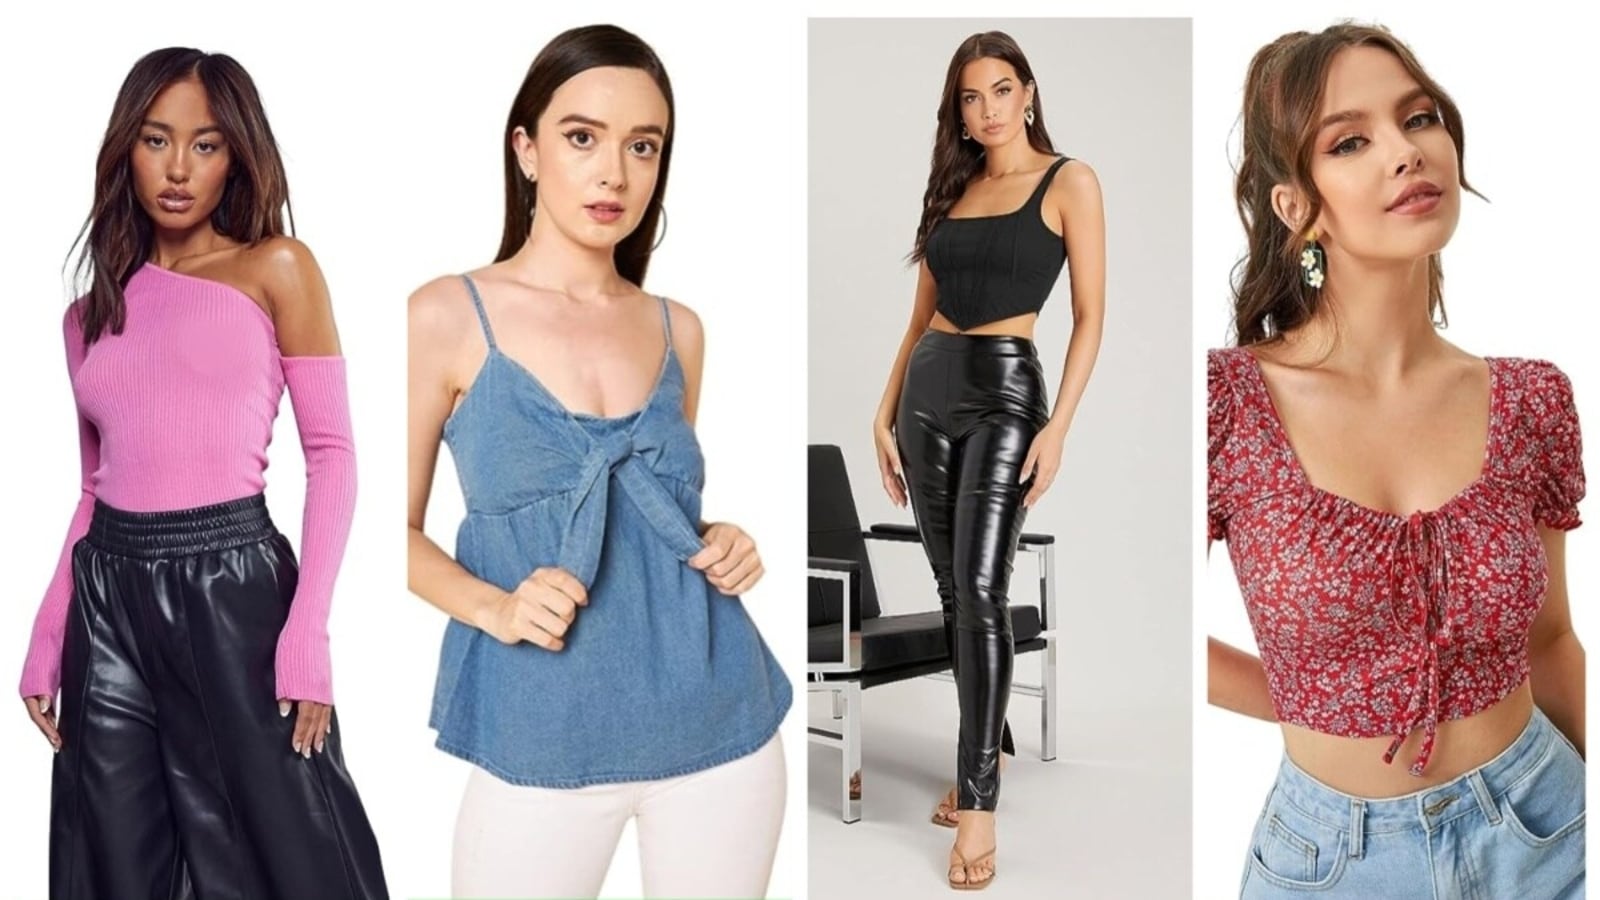 Trendy tops for women: 5 picks to try out in 2023